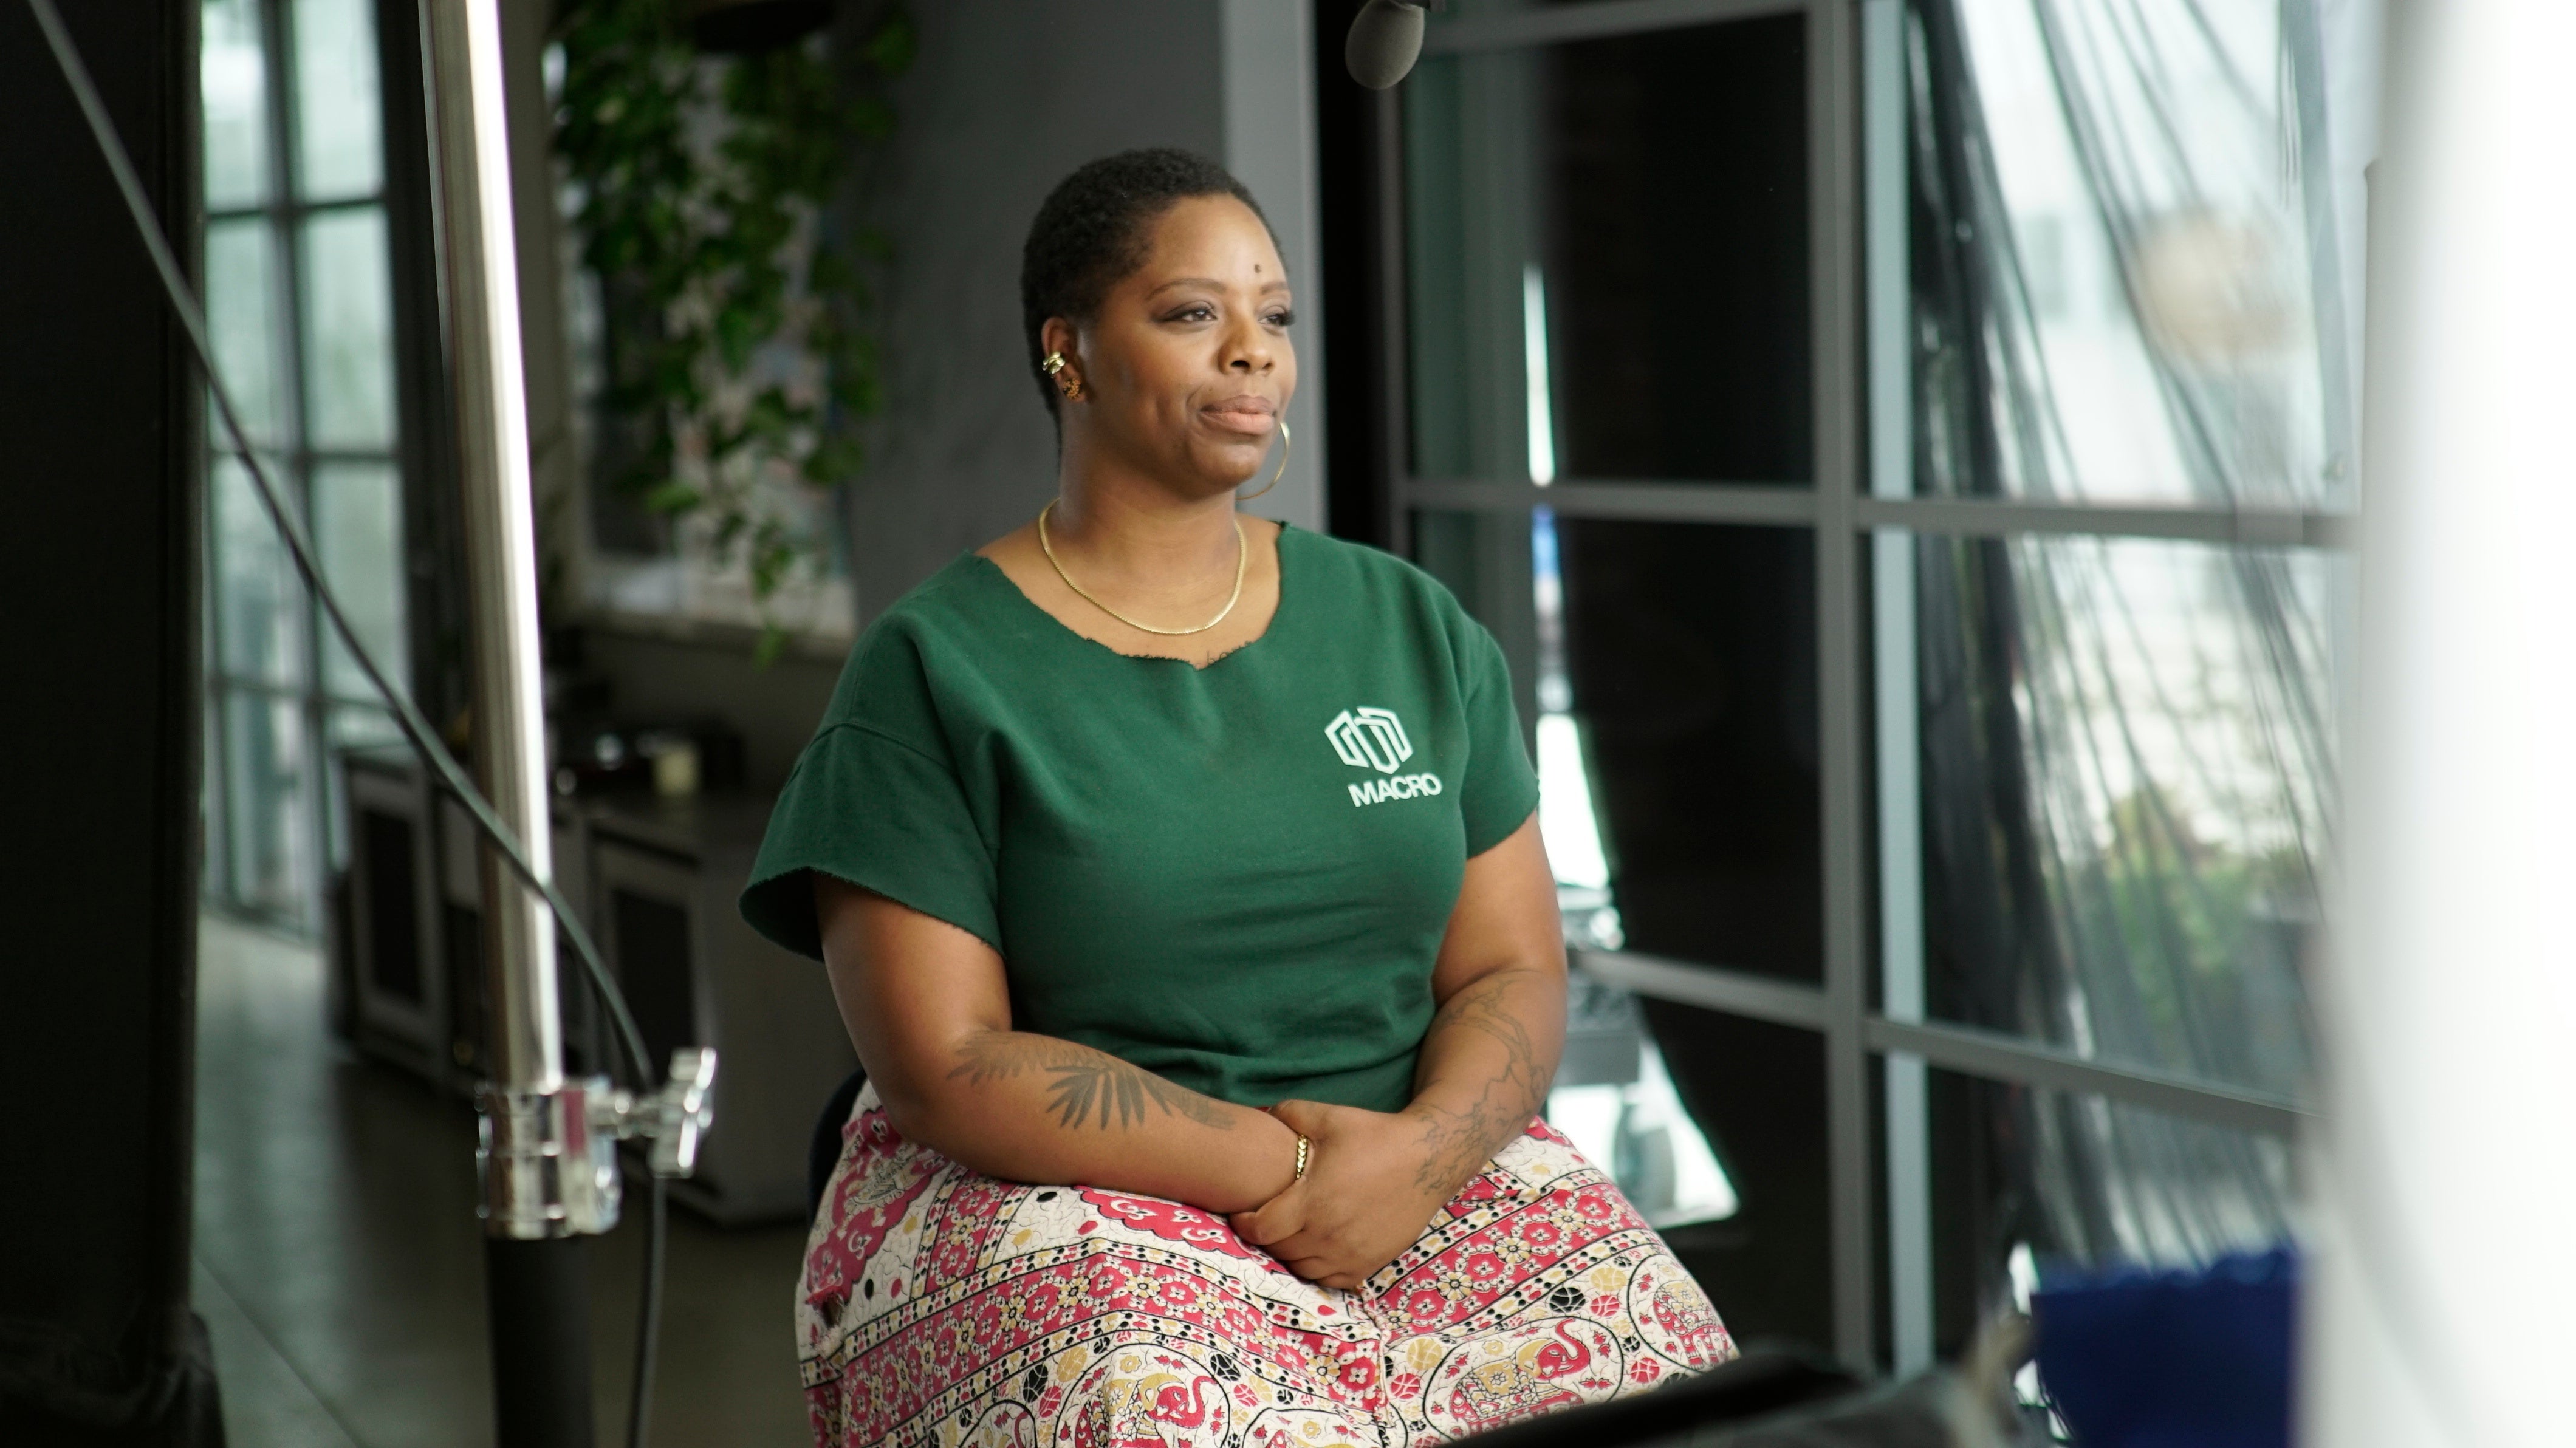 Patrisse Cullors speaks during a PBS documentary